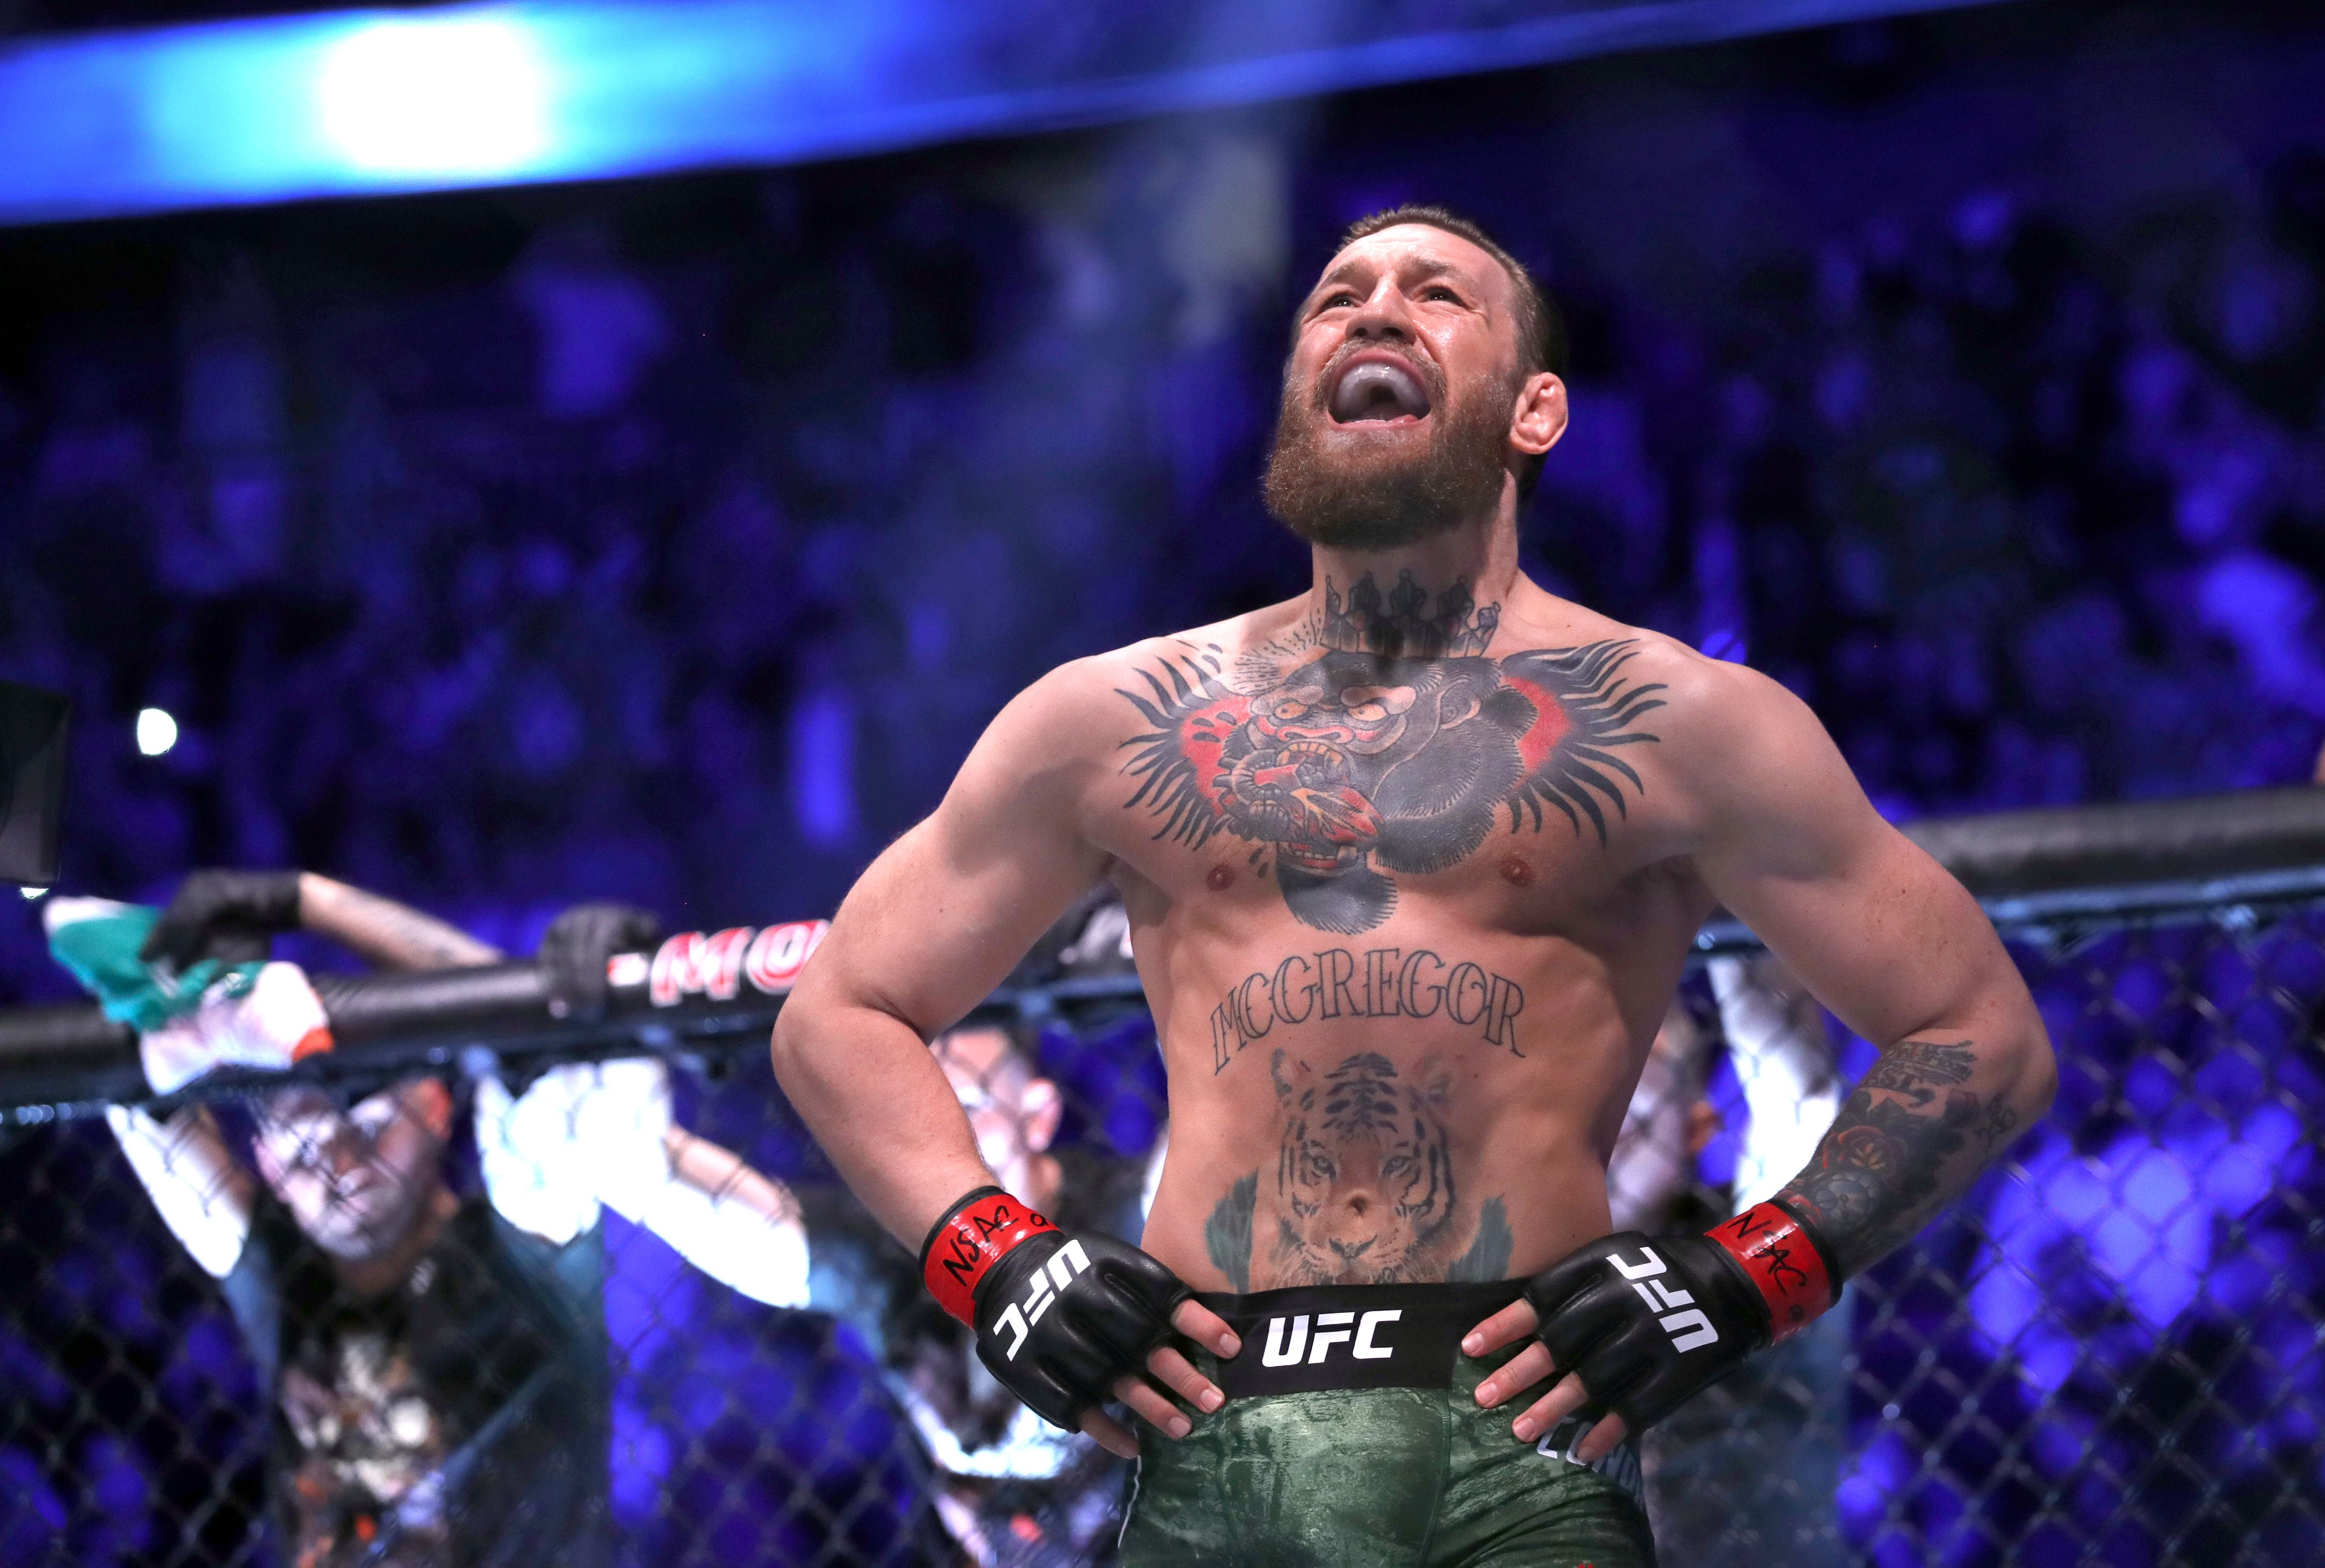 Top Finishes: Conor McGregor 